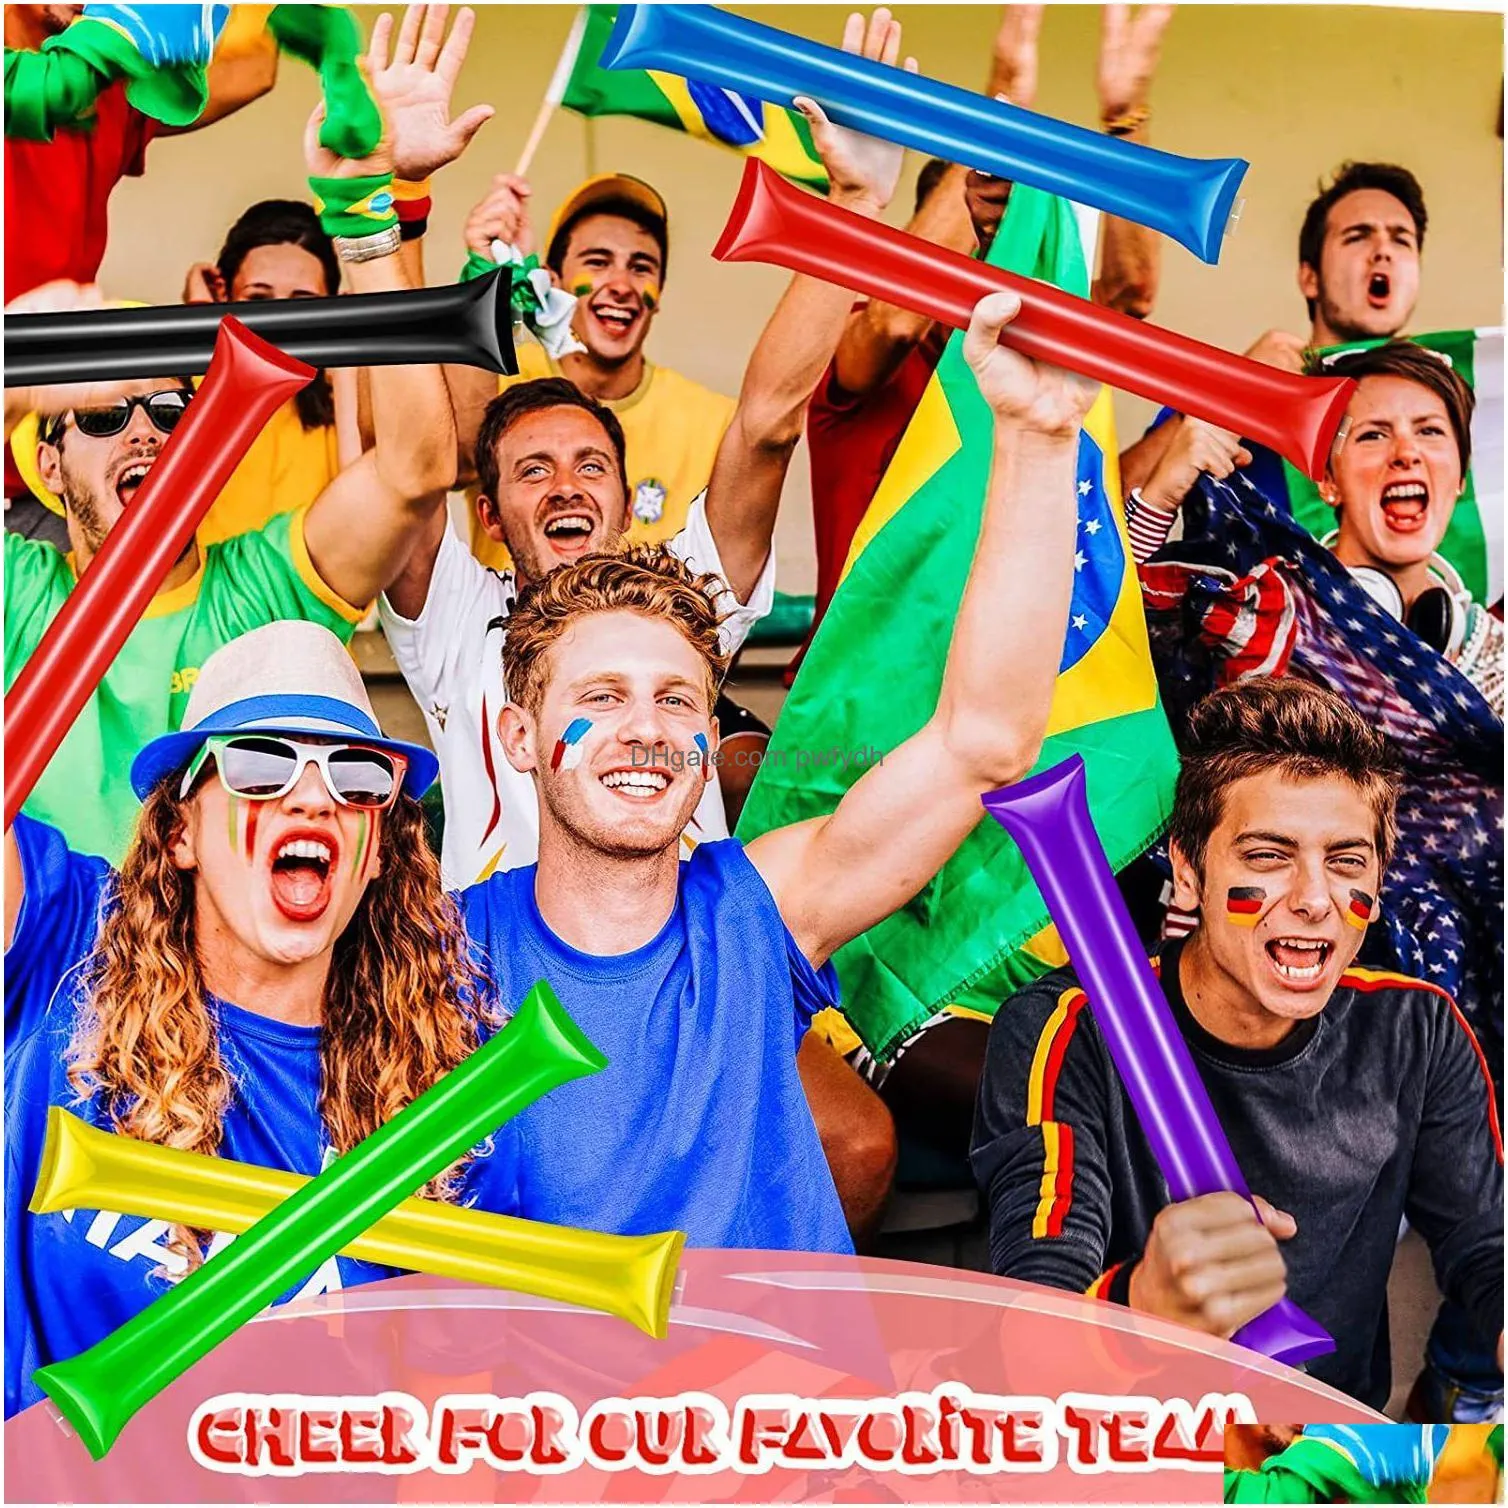 dog toys chews 40pcs thunder sticks team spirit boom sticks cheering stick plastic cheerleading clapper inflatable noise makers for sport party